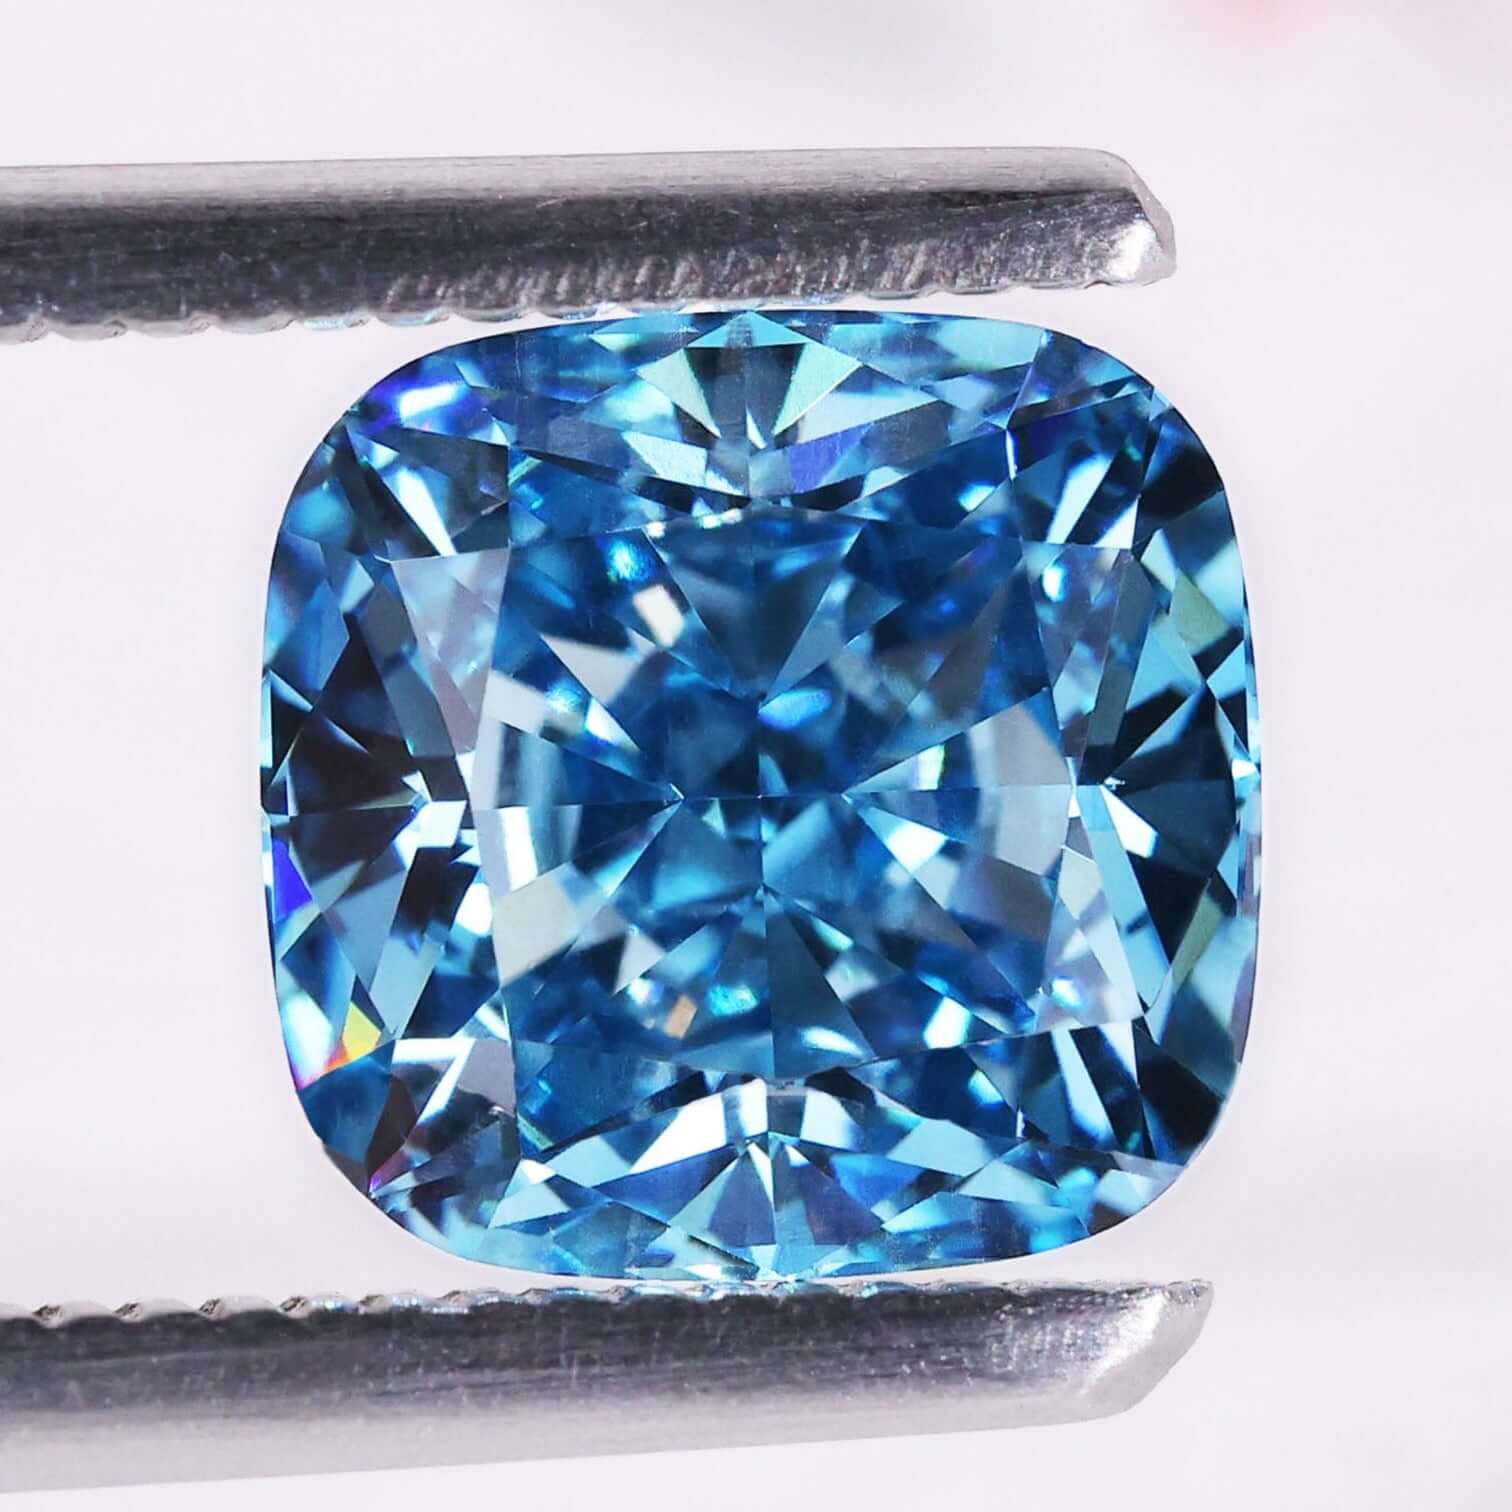 FRED unveils Audacious Blue, the first lab-grown diamond from the